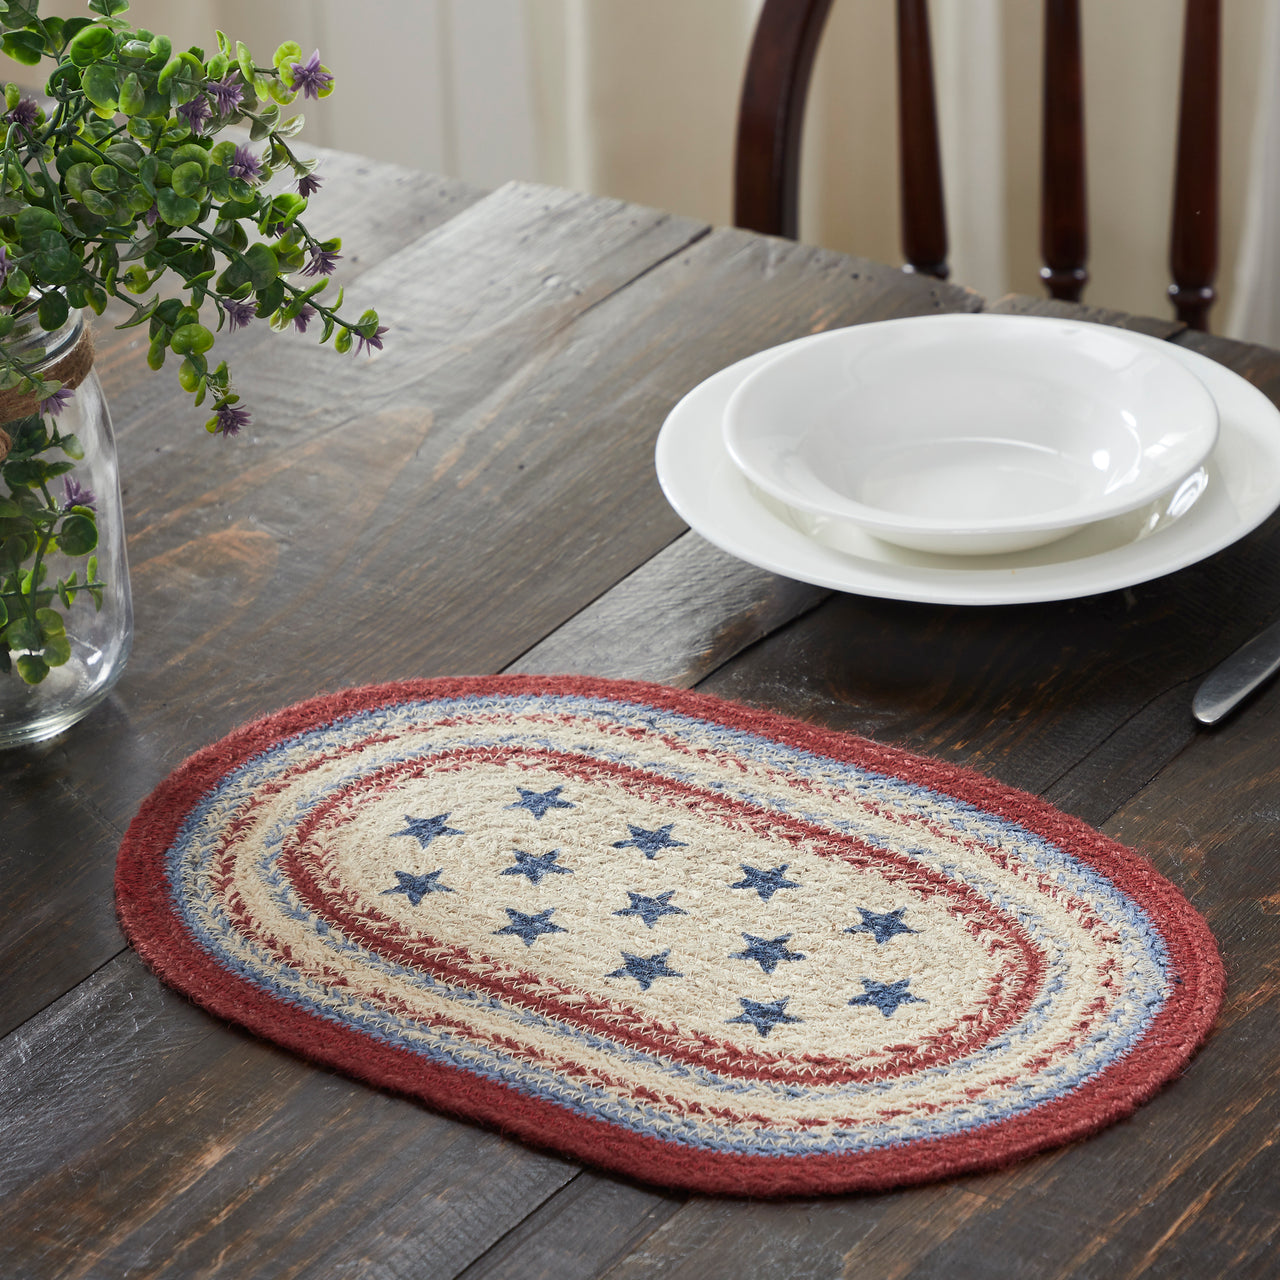 Celebration Jute Braided Oval Placemat 10x15 VHC Brands